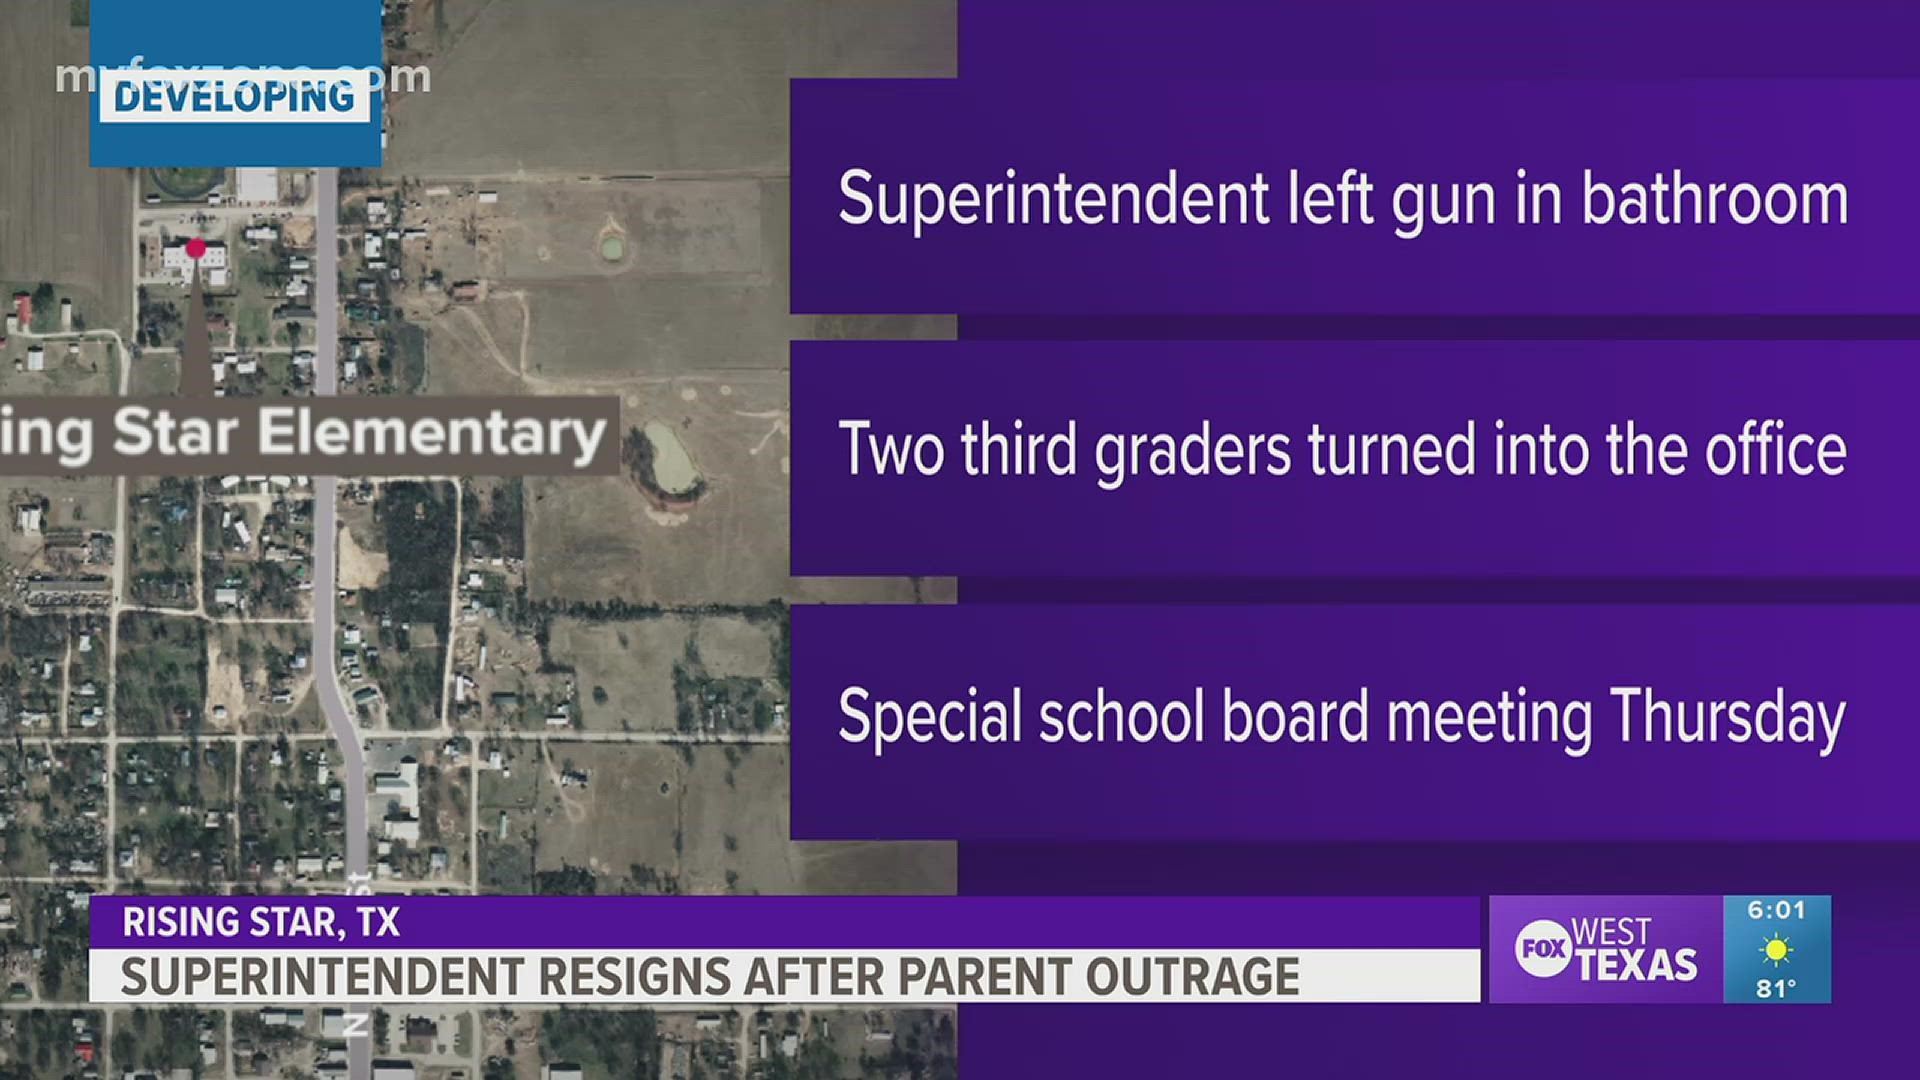 Superintendent resigns after parent outrage.